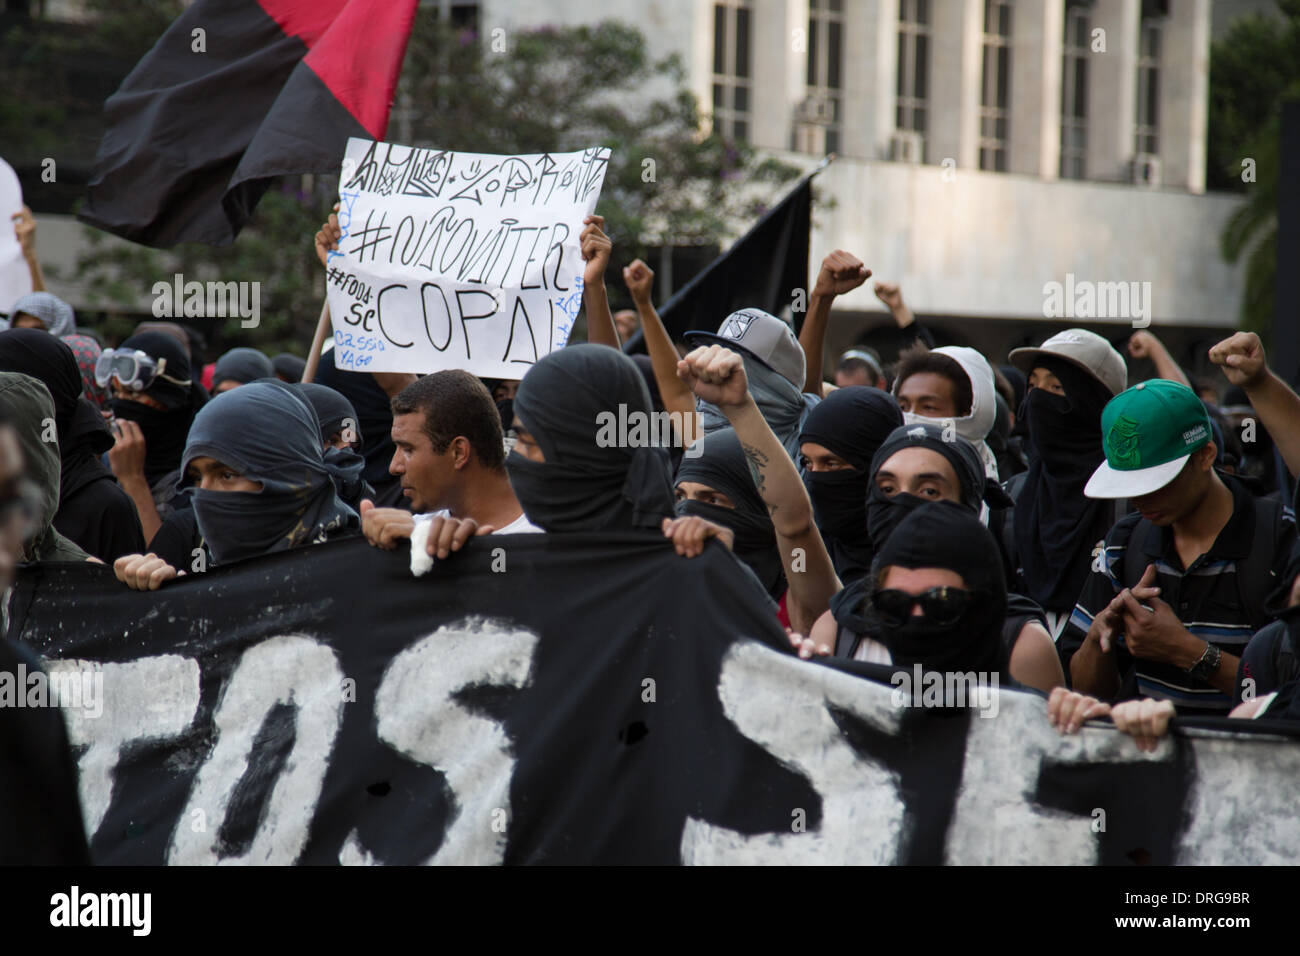 Sao Paulo, Brazil. 25th Jan, 2014. Protesters carry signs and shout slogans during a rally at Paulista Avenue in Sao Paulo against the World Cup in Brazil. People took to the street to complain about the costs of staging the World Cup in Brazil.  Credit:  Andre M. Chang/Alamy Live News Stock Photo